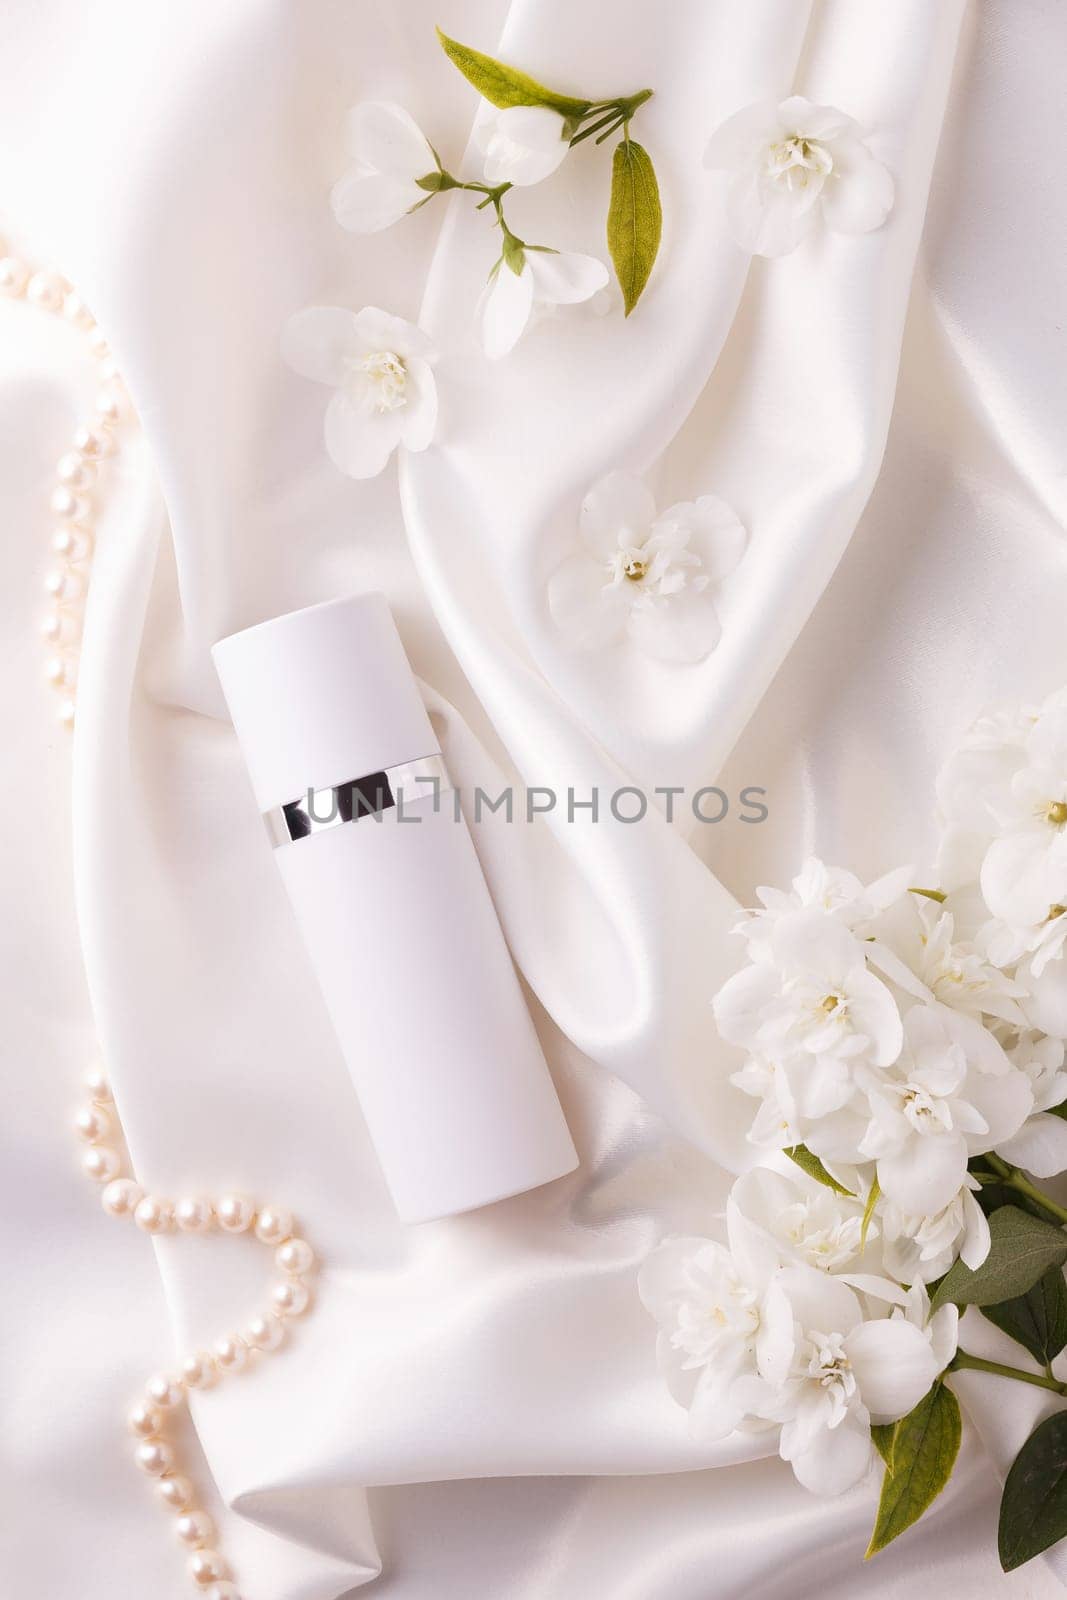 A jar of liquid cream with flowers on a white flowing satin.